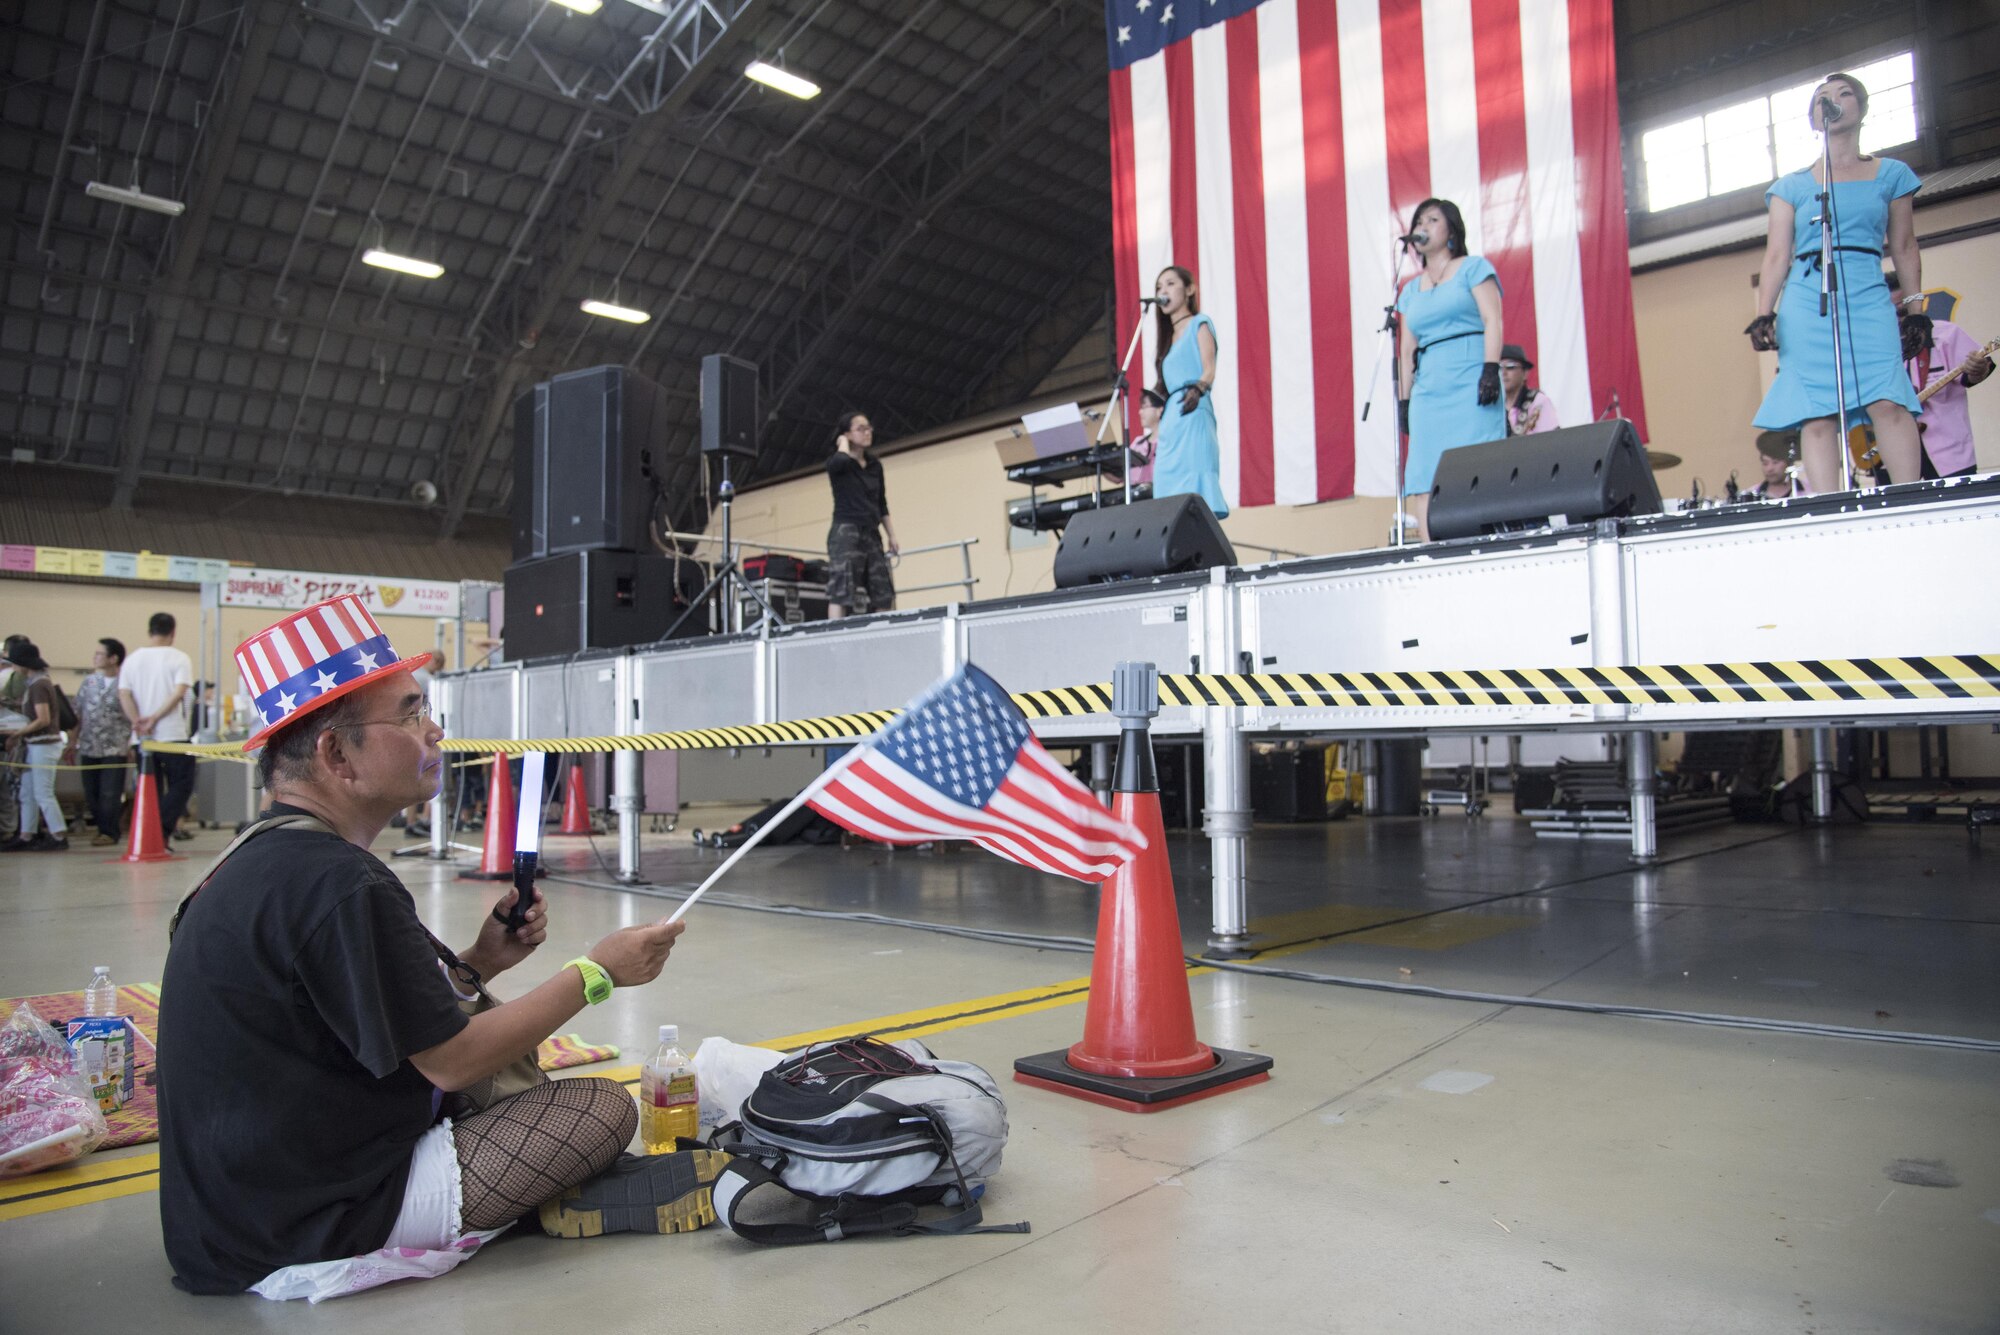 A Japanese man waves an American flag as he watches a musical performance during the 2016 Friendship Festival Sept. 17, 2016 at Yokota Air Base, Japan. The Friendship Festival is a two-day event where Yokota opens its gates to our Japanese neighbors. In 2015, more than 185,000 people visited Yokota during the Friendship Festival. (U.S. Air Force photo by Staff Sgt. Michael Washburn/Released)